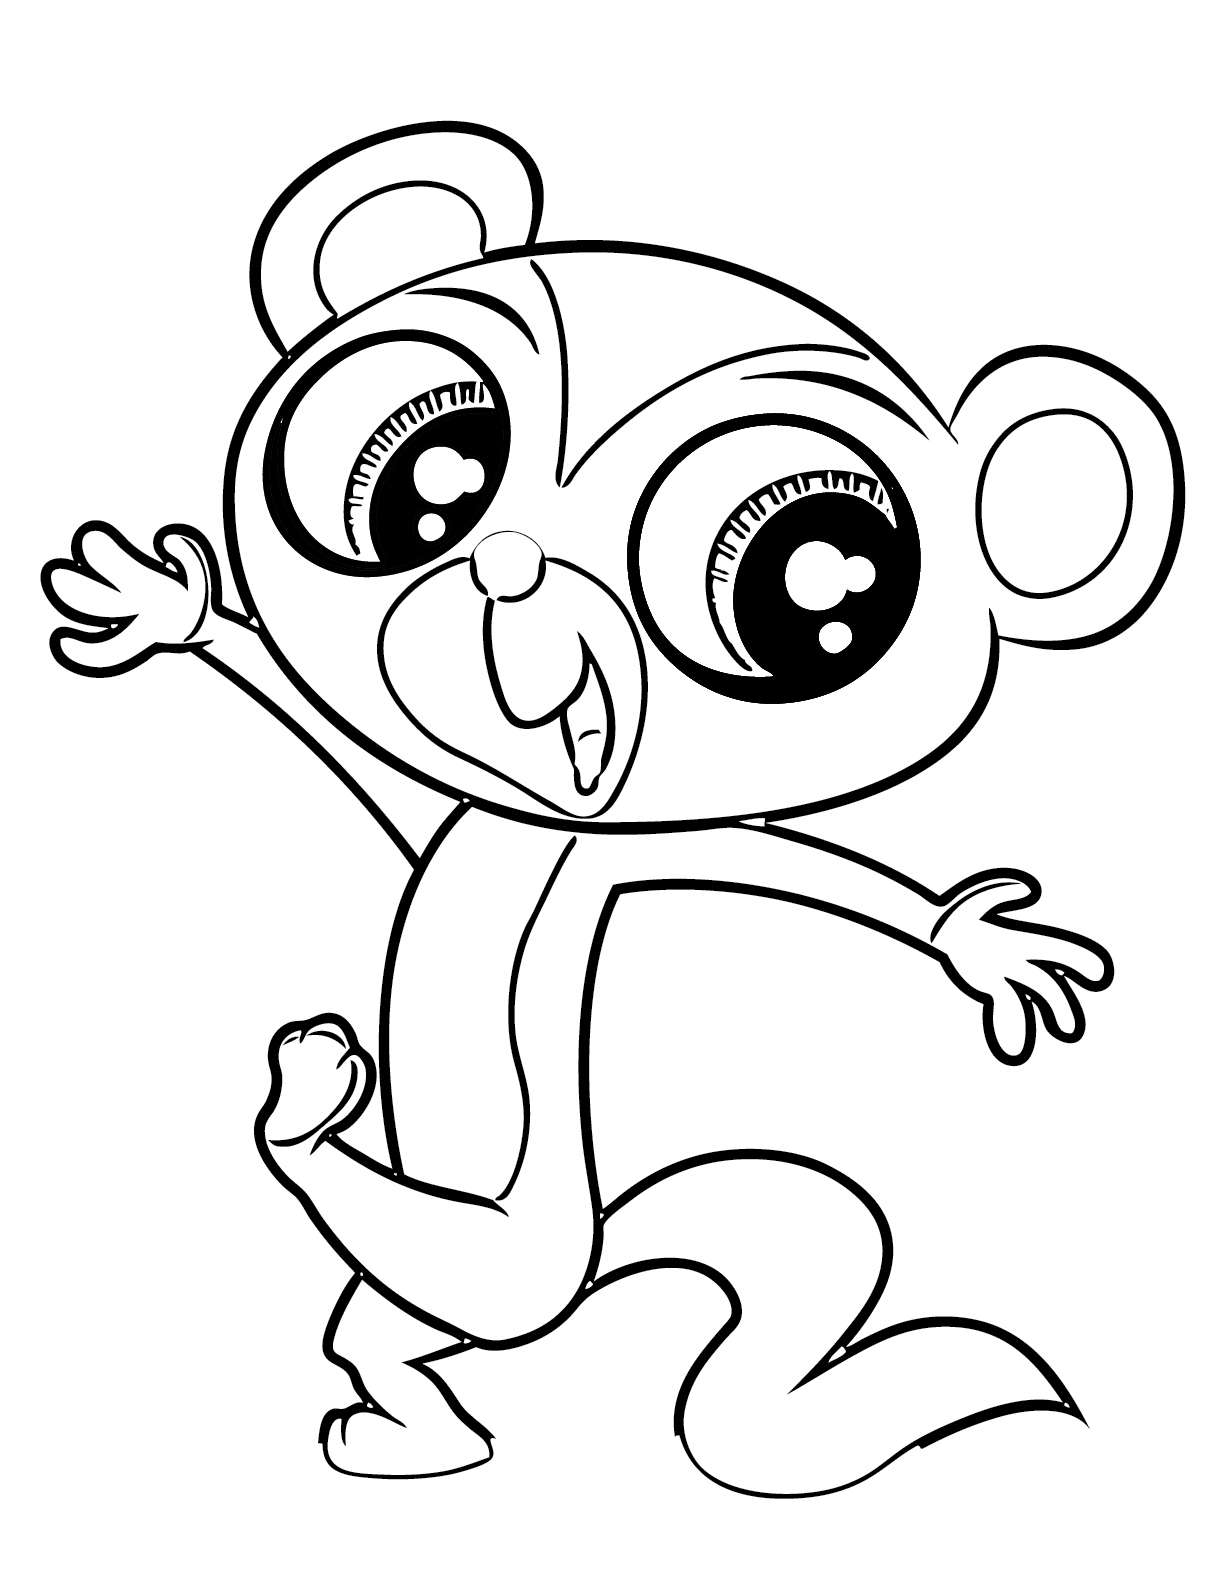 Download Littlest Pet Shop Coloring Pages To Color Online For Free